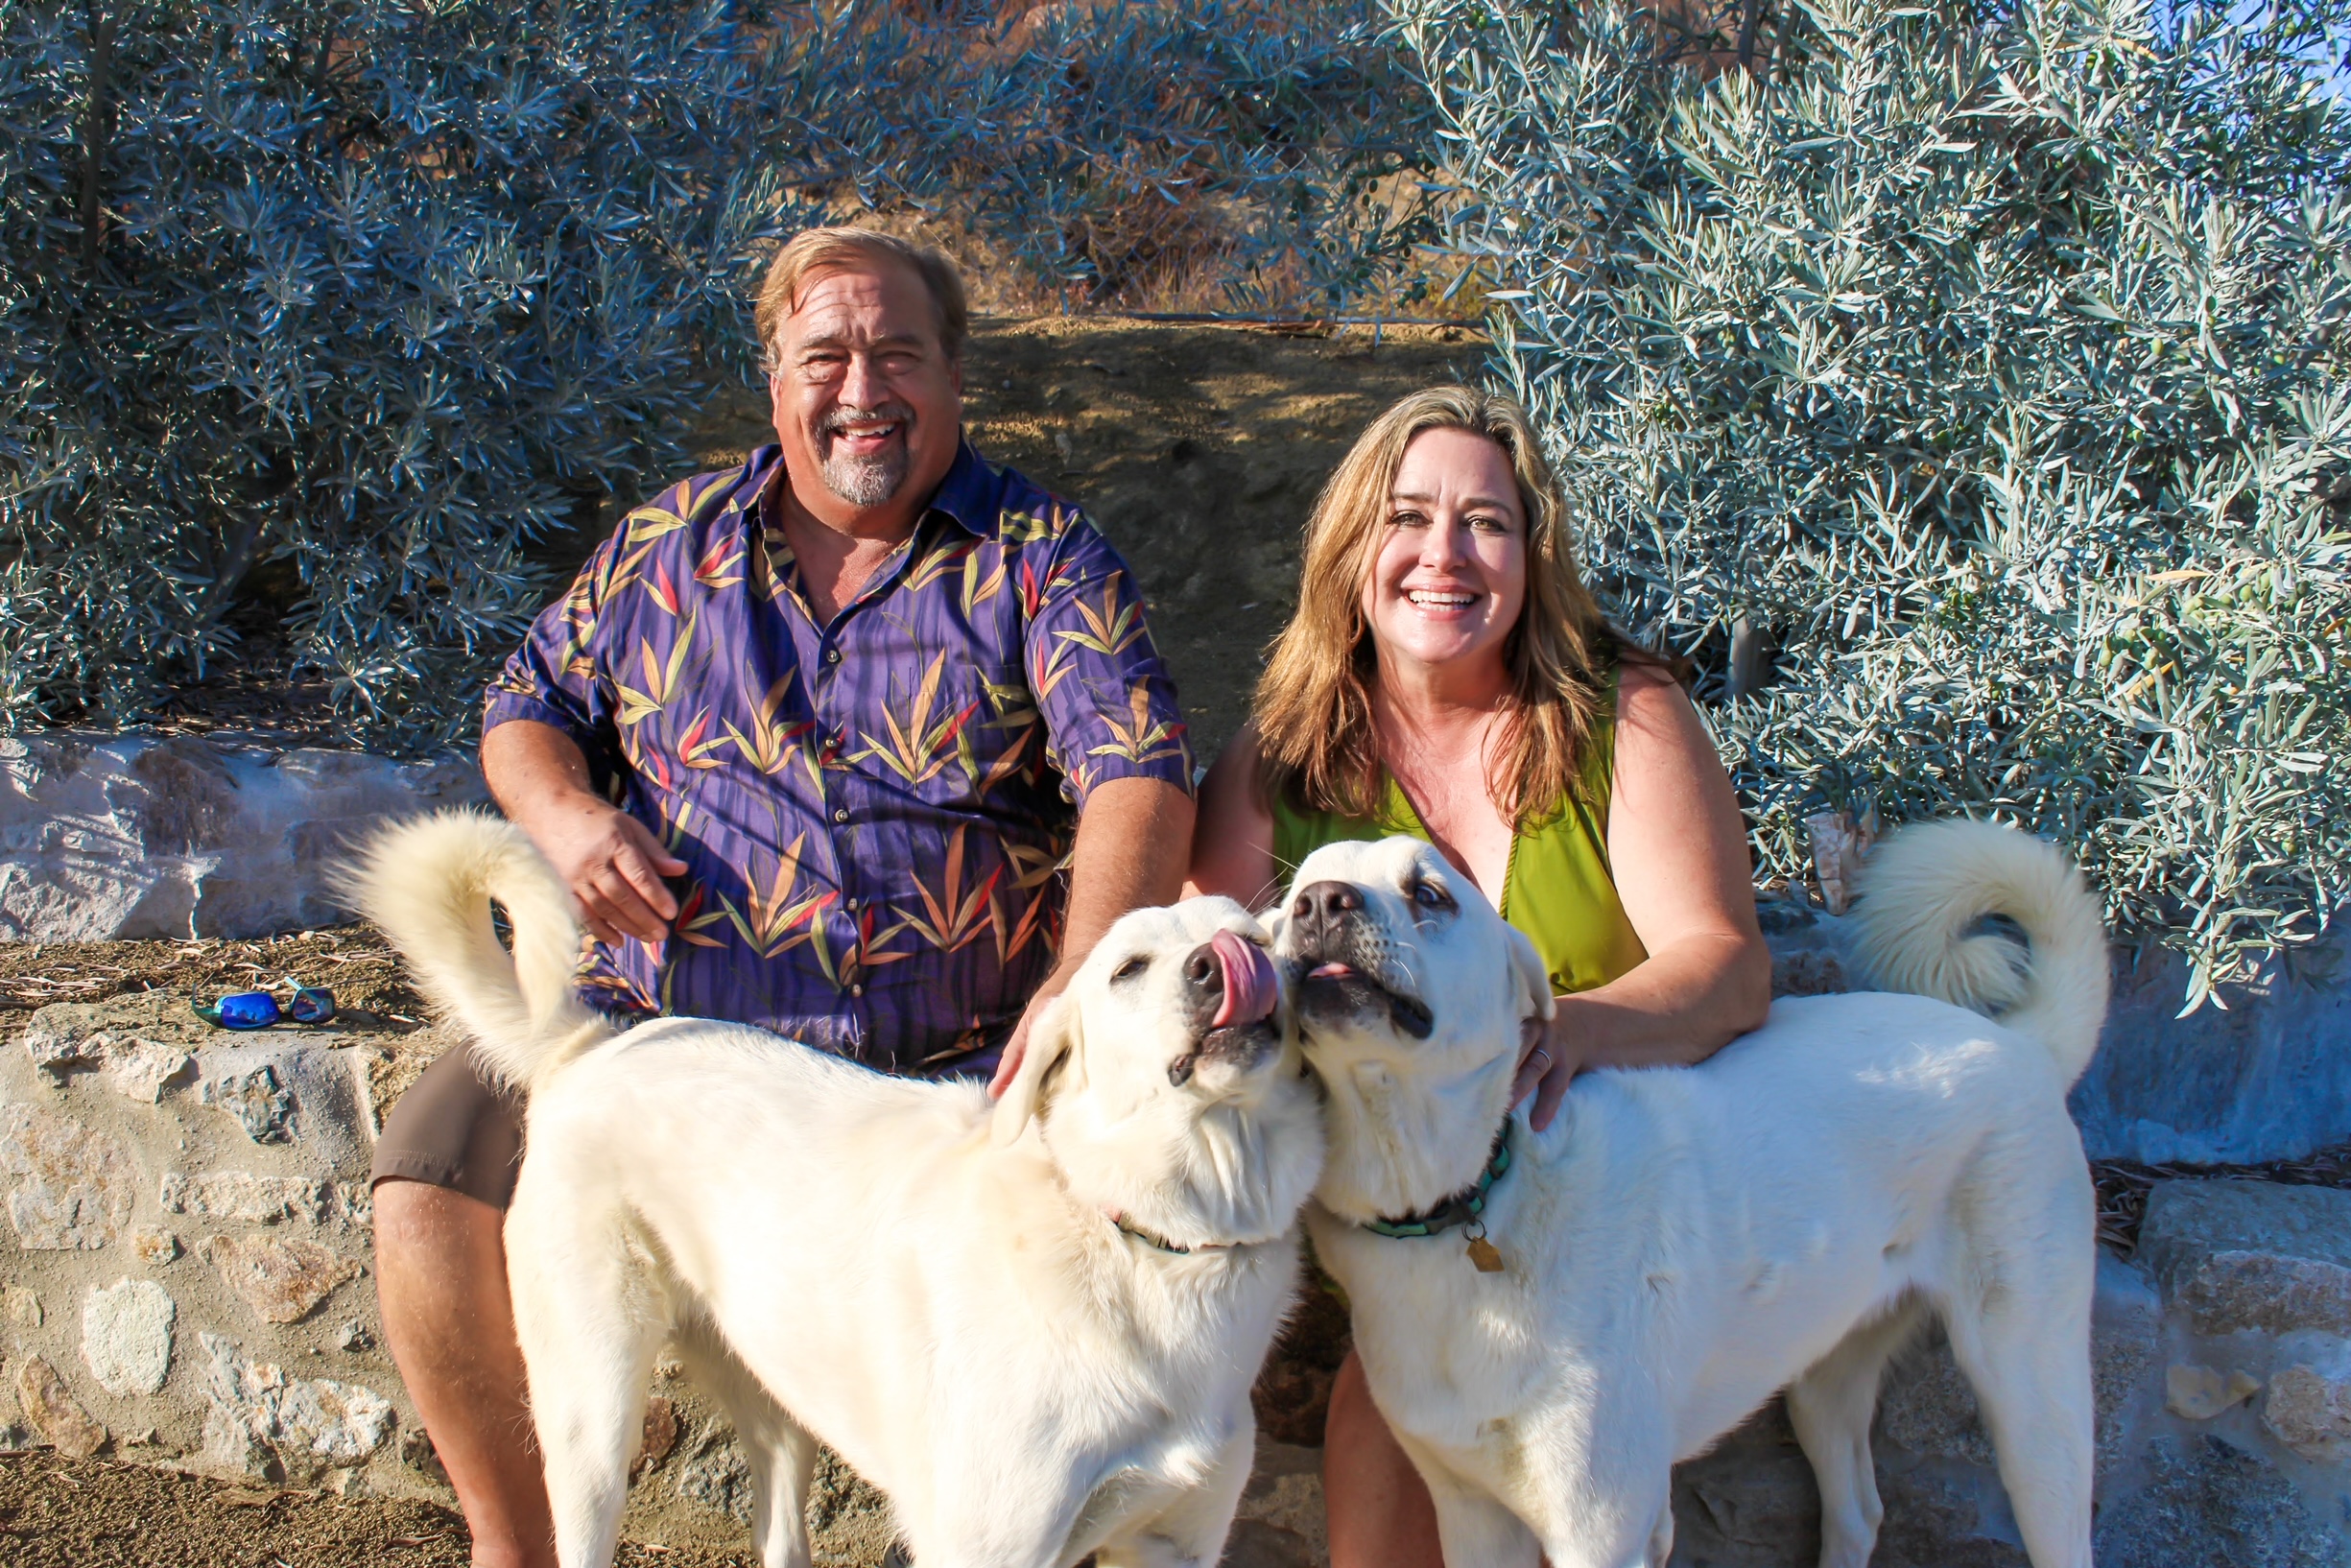 Scott and Susan have been married for five years. They bought the property that would become ToothAcre Ranch in Ramona, Calif., in 2017.